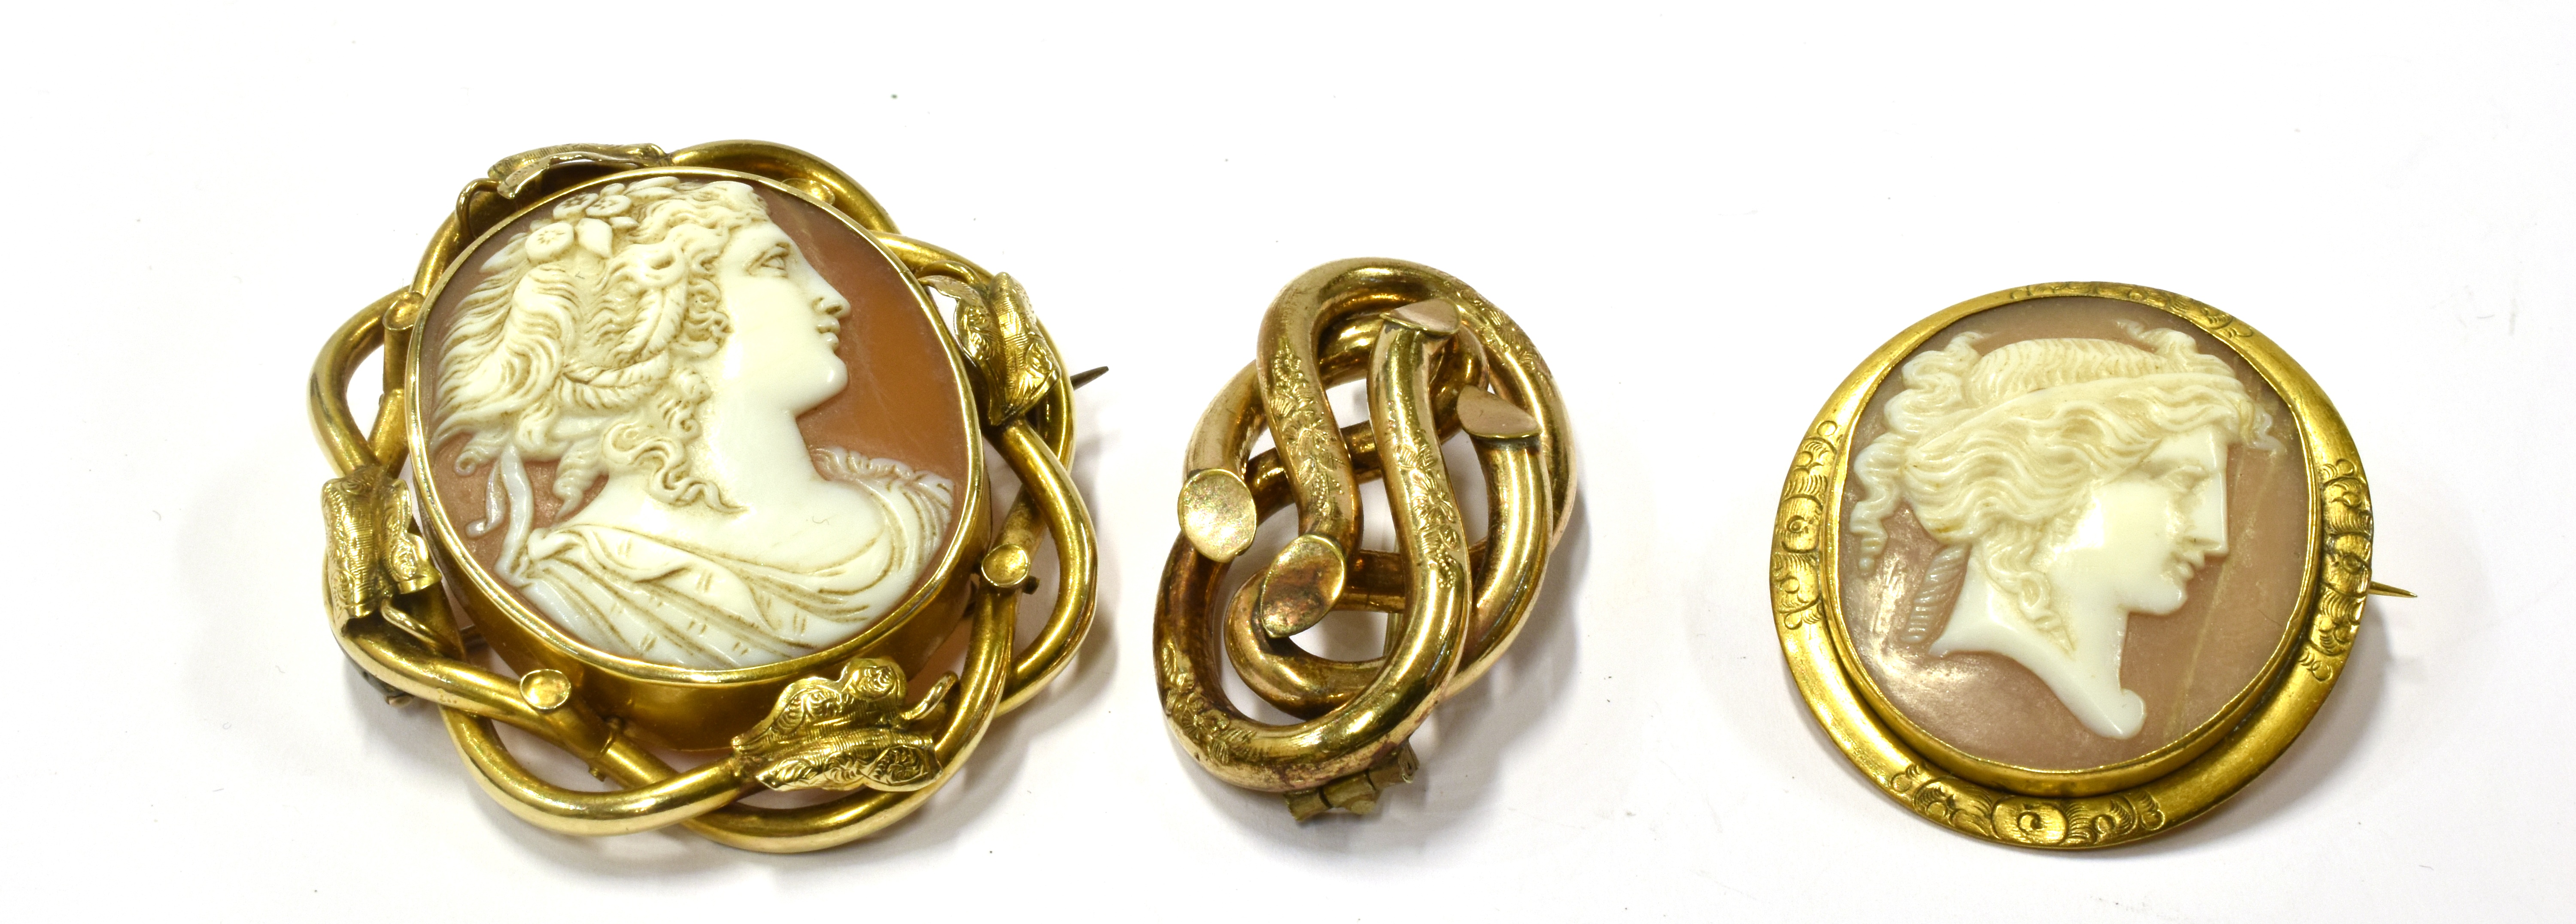 TWO VICTORIAN SHELL CAMEO BROOCHES AND A KNOT BROOCH the larger cameo depicting a neoclassical